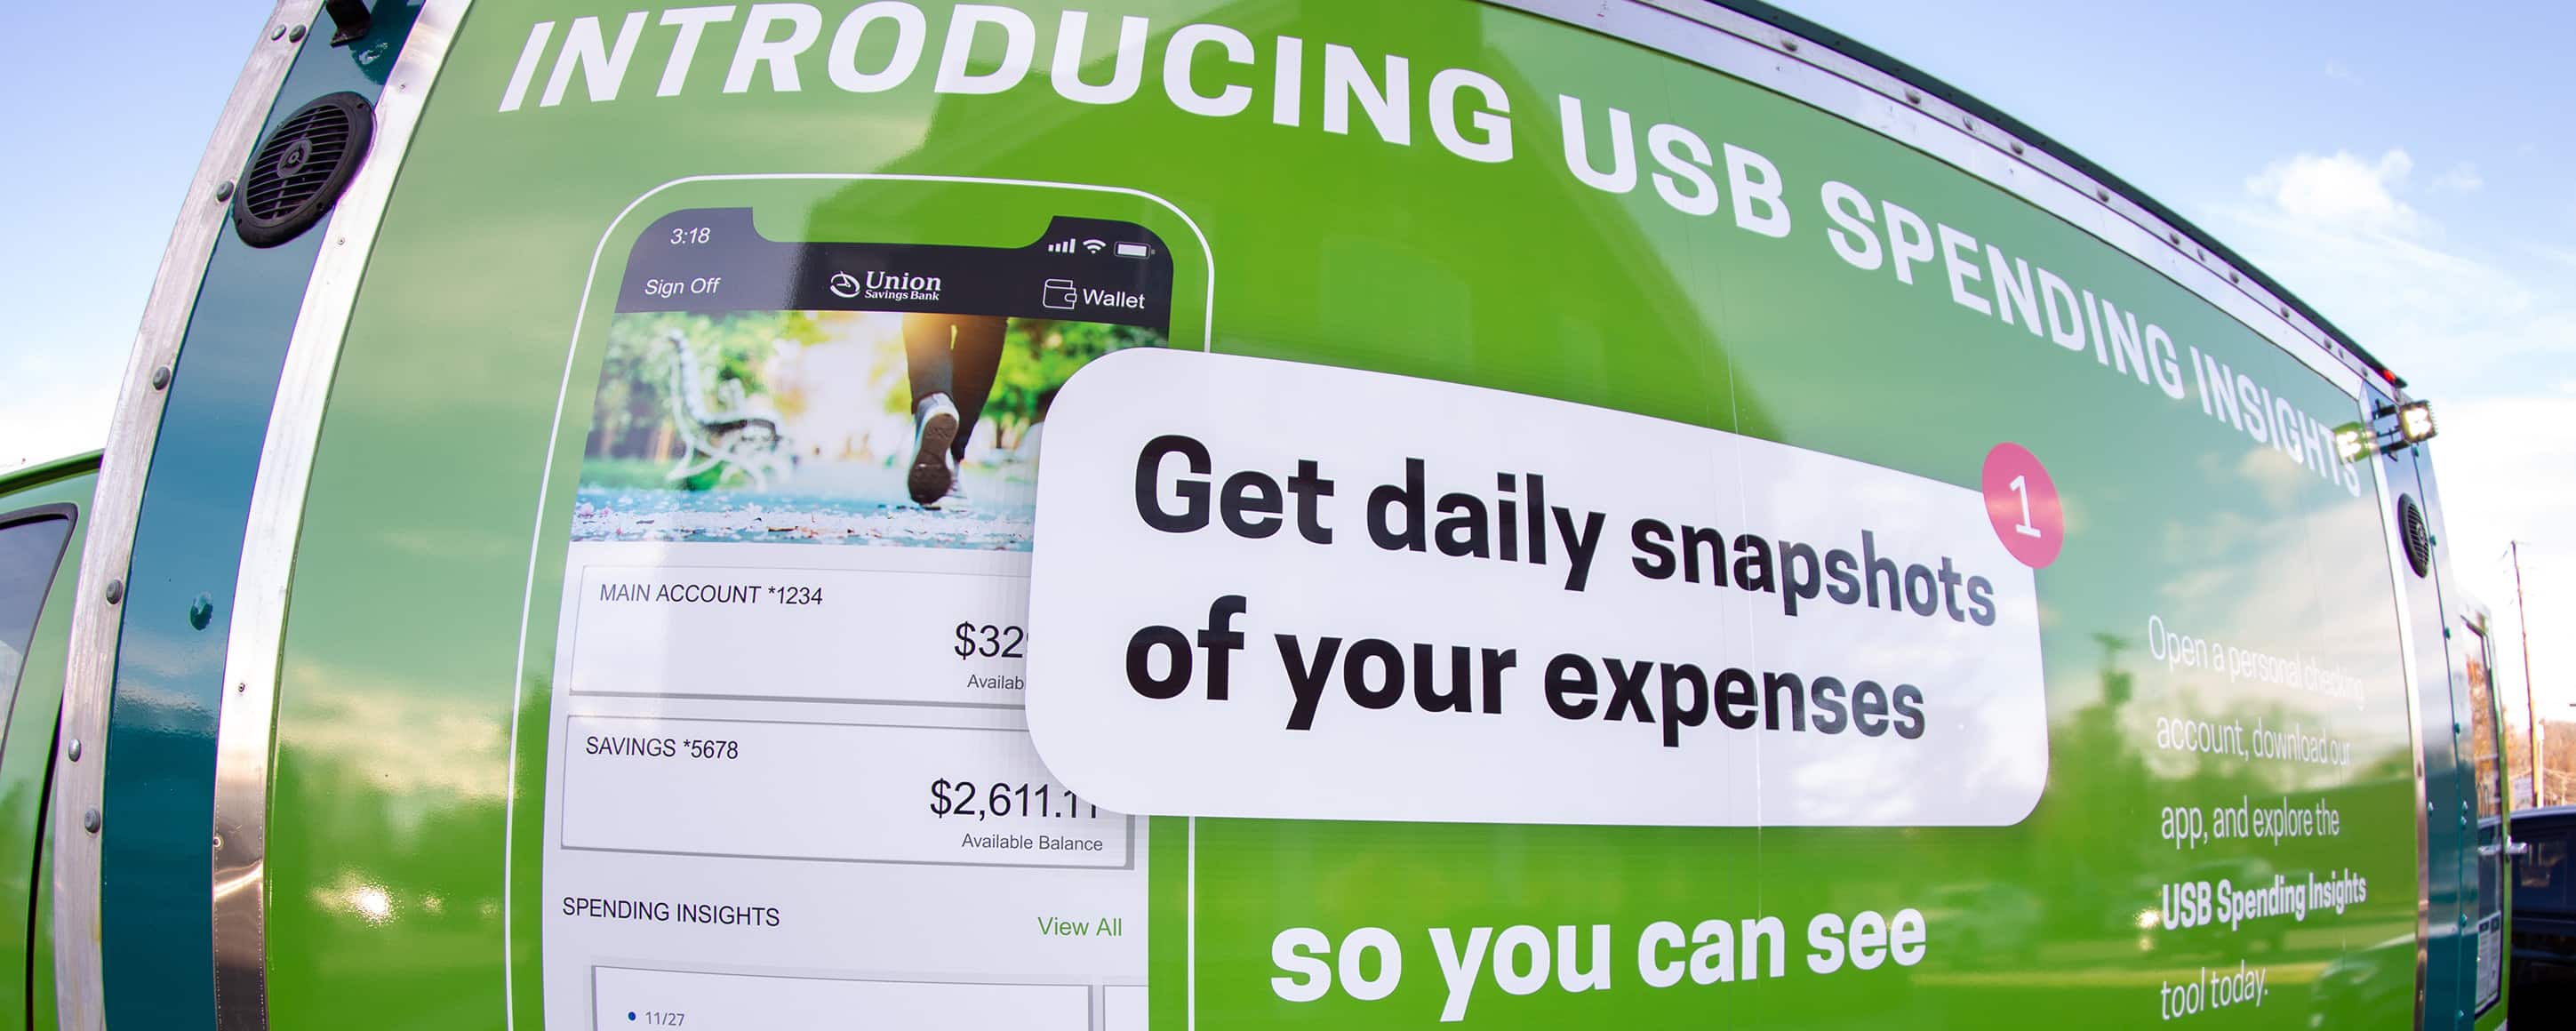 How to Make the Most of USB’s New Spending Insights